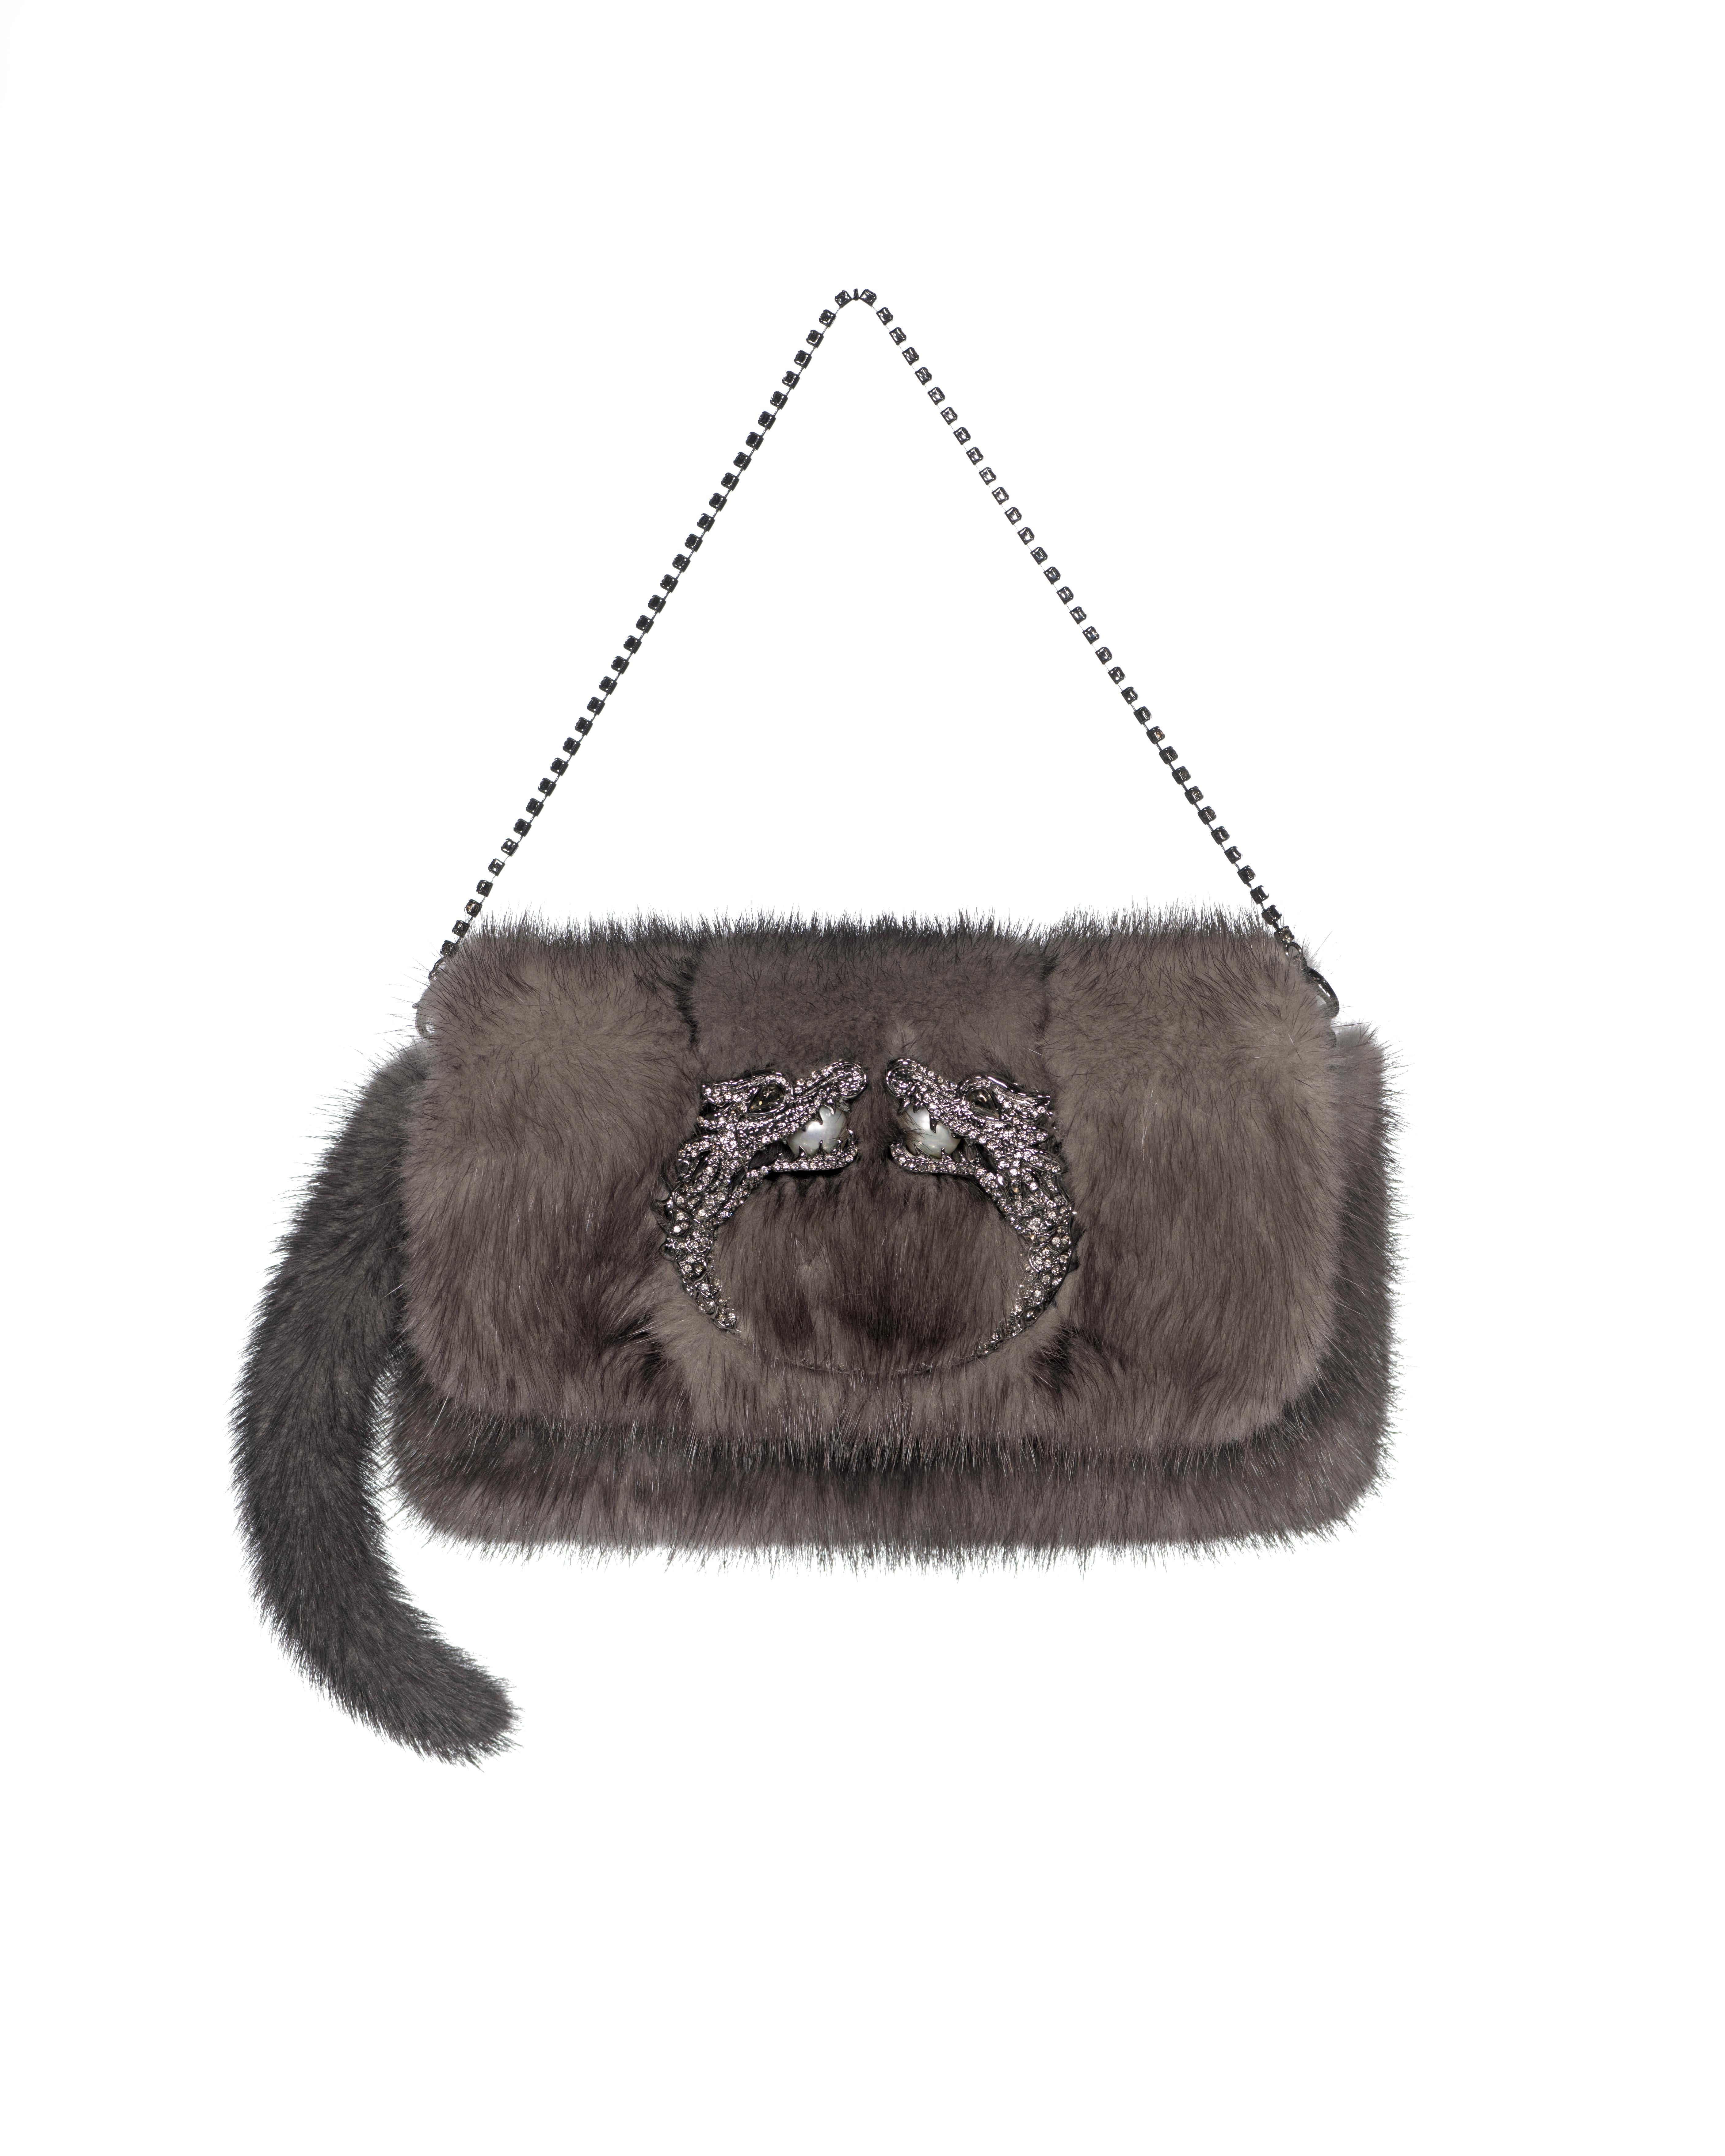 ▪ Archival Gucci Mink Fur Evening Mini Clutch / Bag
▪ Creative Director: Tom Ford
▪ Fall-Winter 2004
▪ Sold by One of a Kind Archive
▪ These evening mink fur mini bags featured in the final segment of Tom Ford's last collection for Gucci and starred